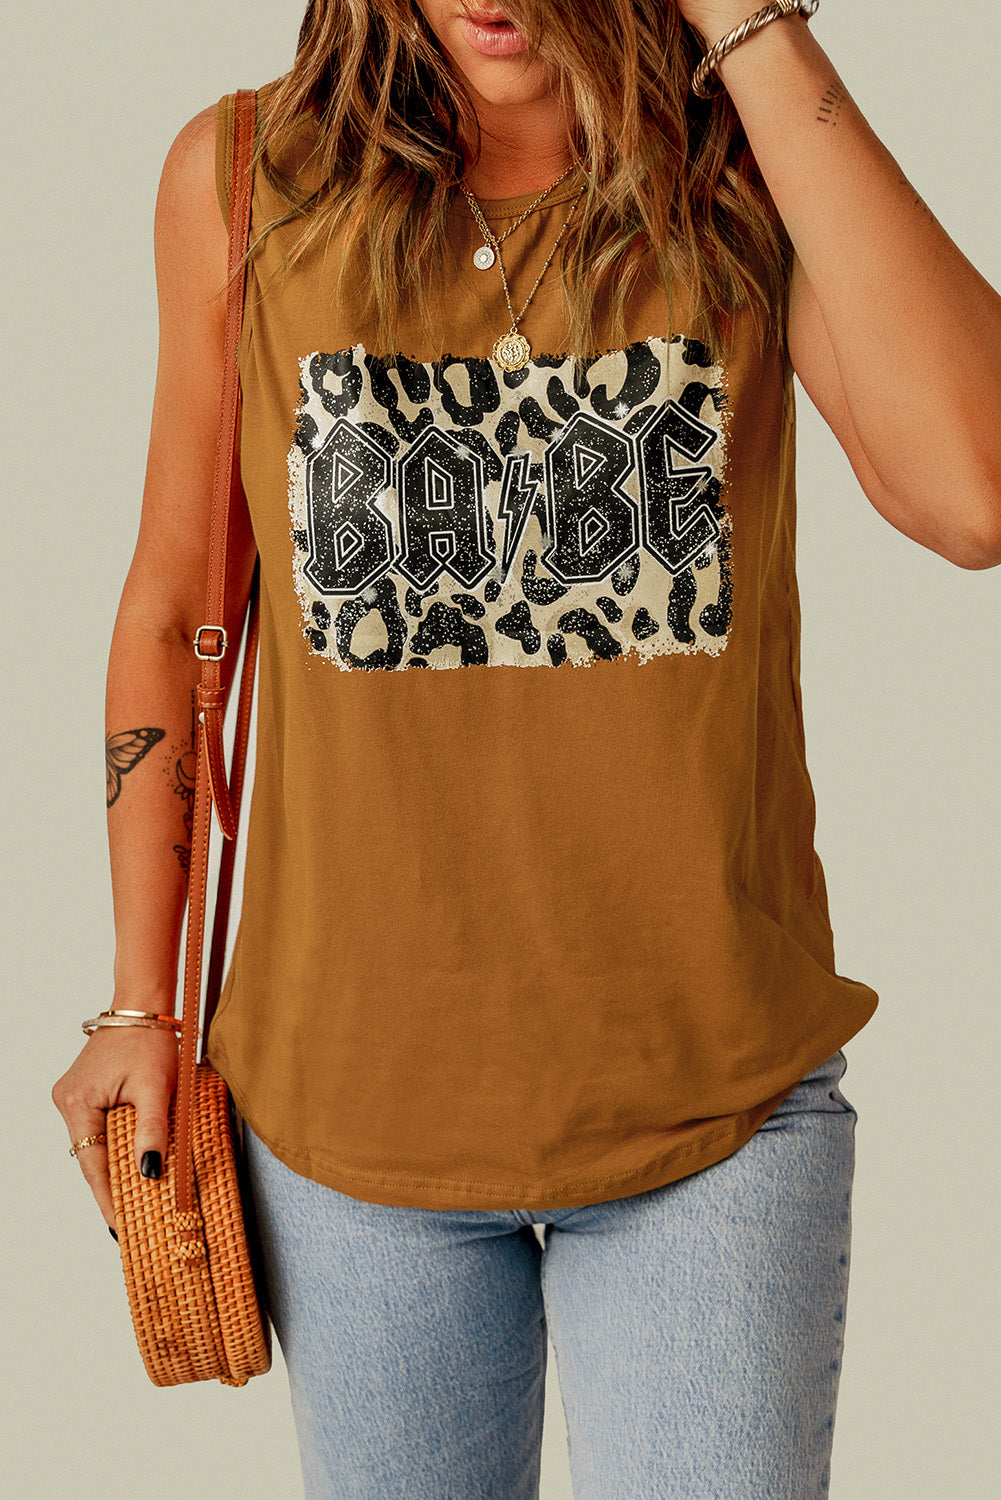 Leopard BABE Graphic Tank